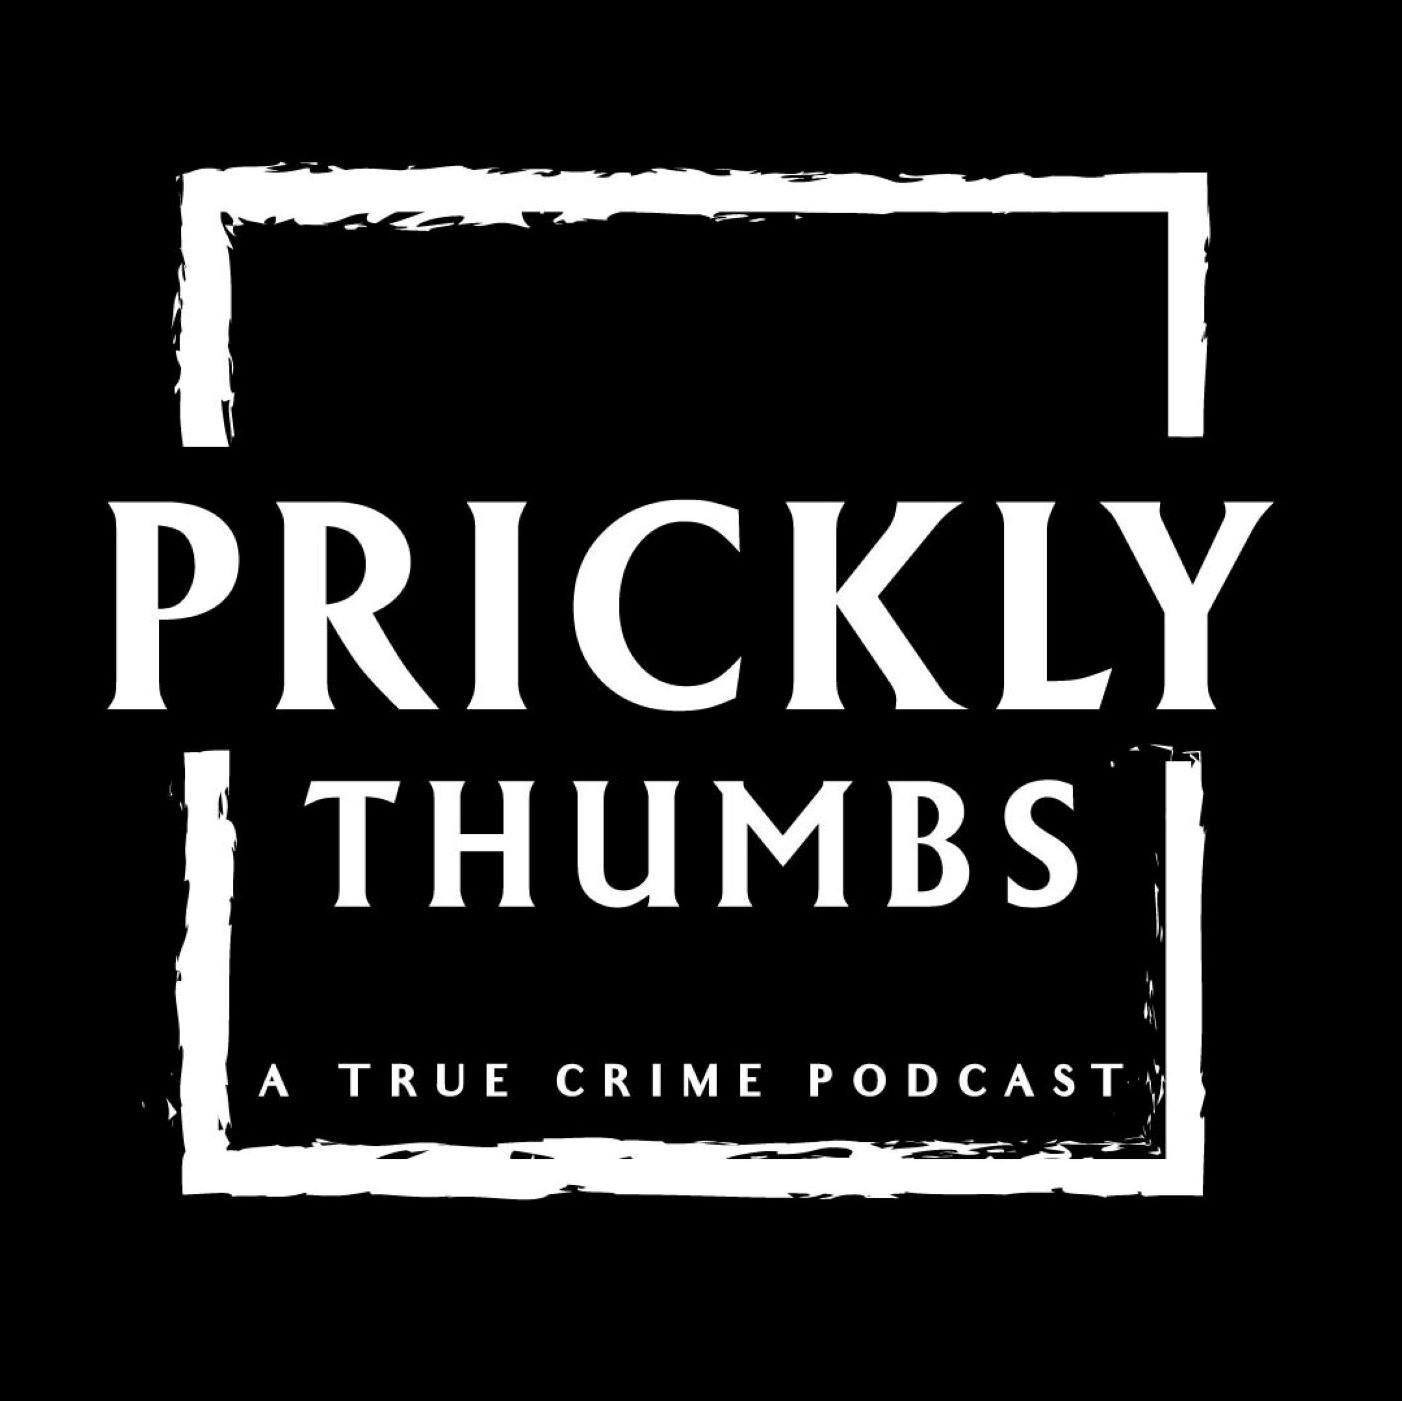 Prickly Thumbs: A True Crime Podcast